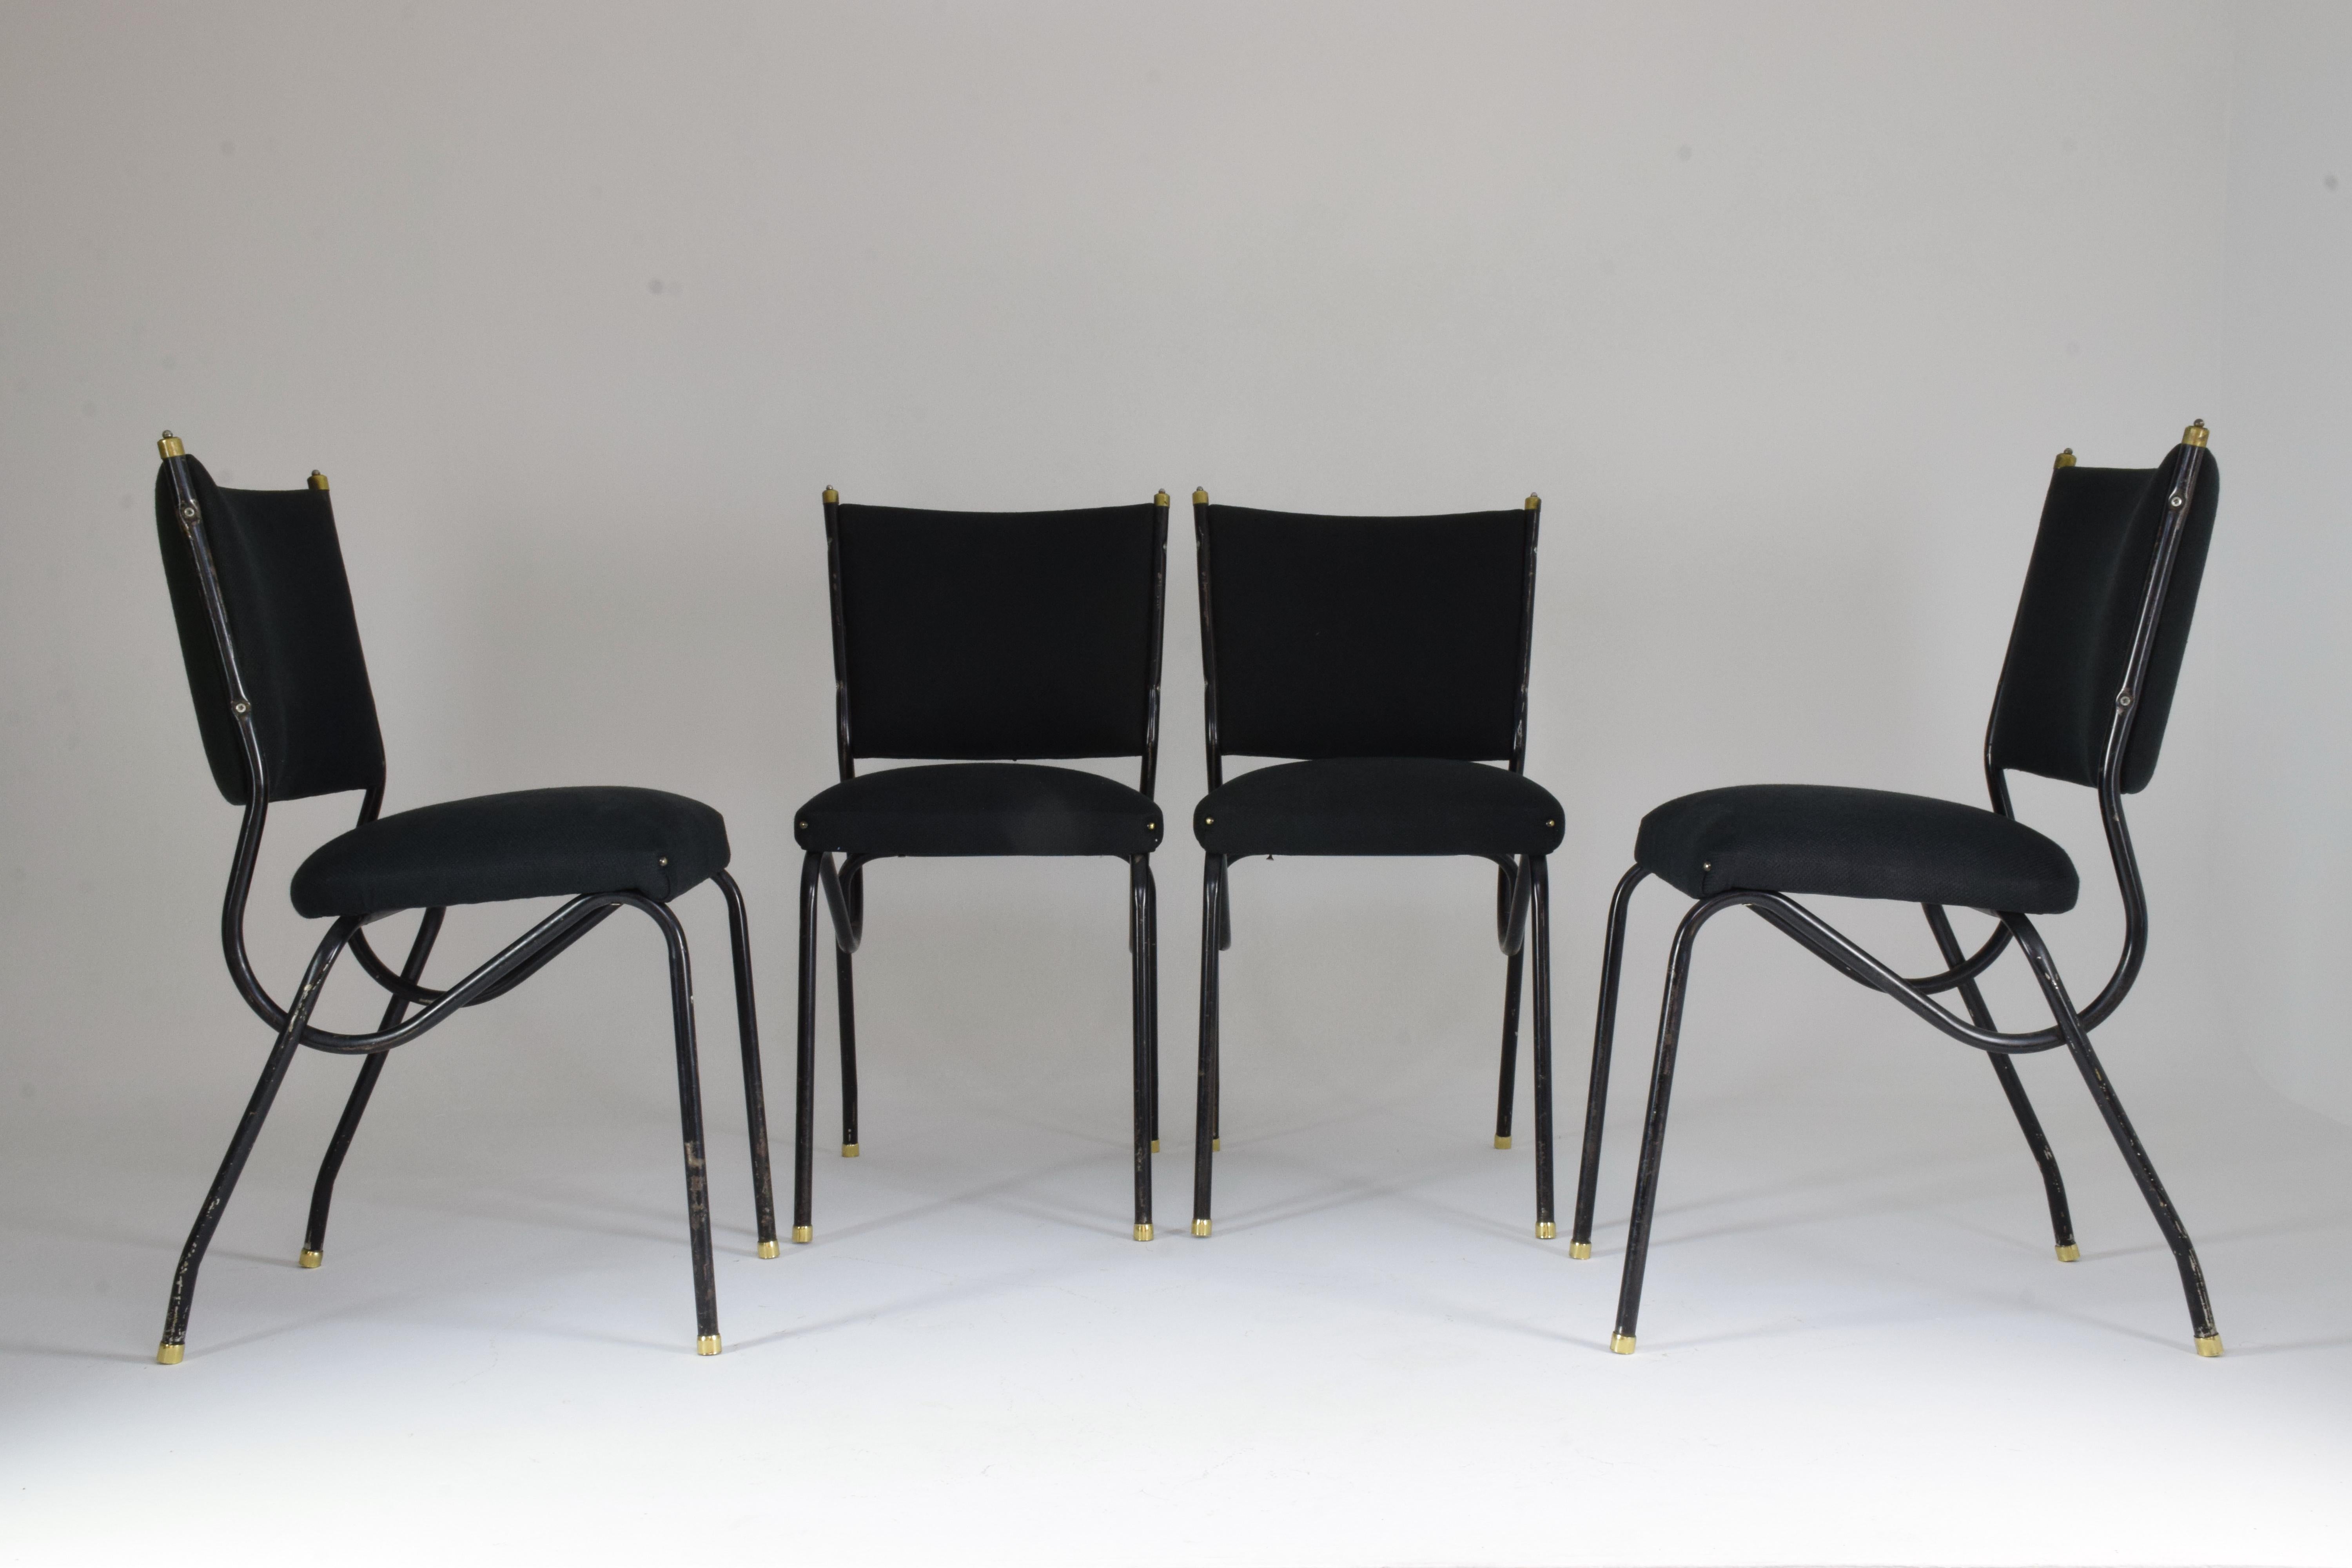 A beautiful set of five Mid-Century Modern dining chairs designed in curved black lacquer tubular steel with a brass detailed structure by Studio BBPR circa 1950s.
The upholstery is entirely restored in black fabric, the structure has been purposely